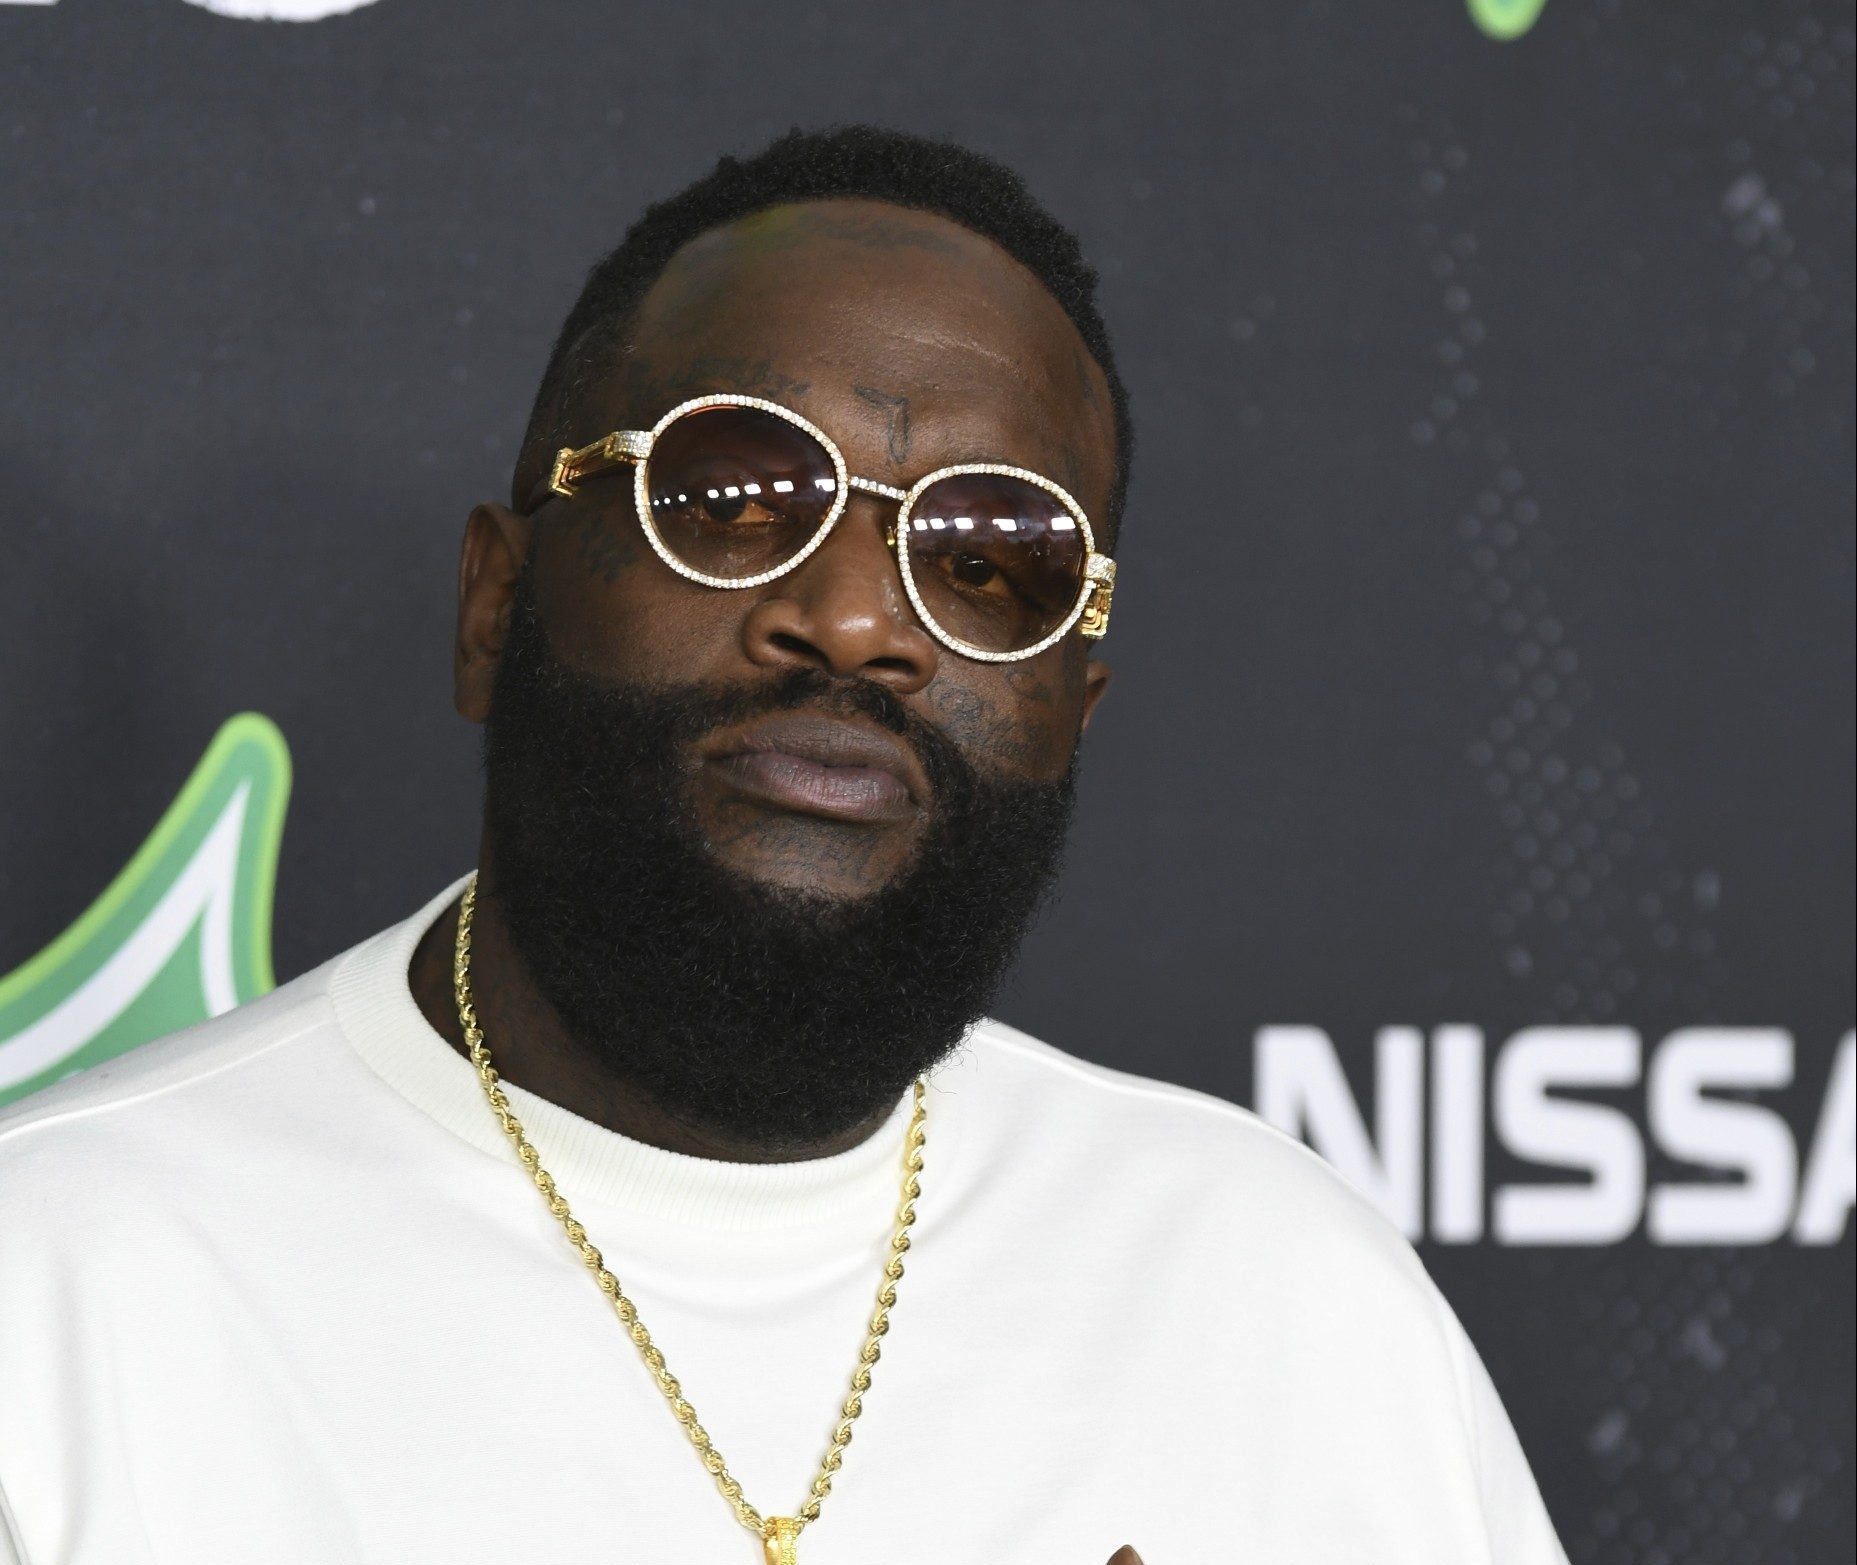 Rick Ross and DJ Envy beef over their car shows